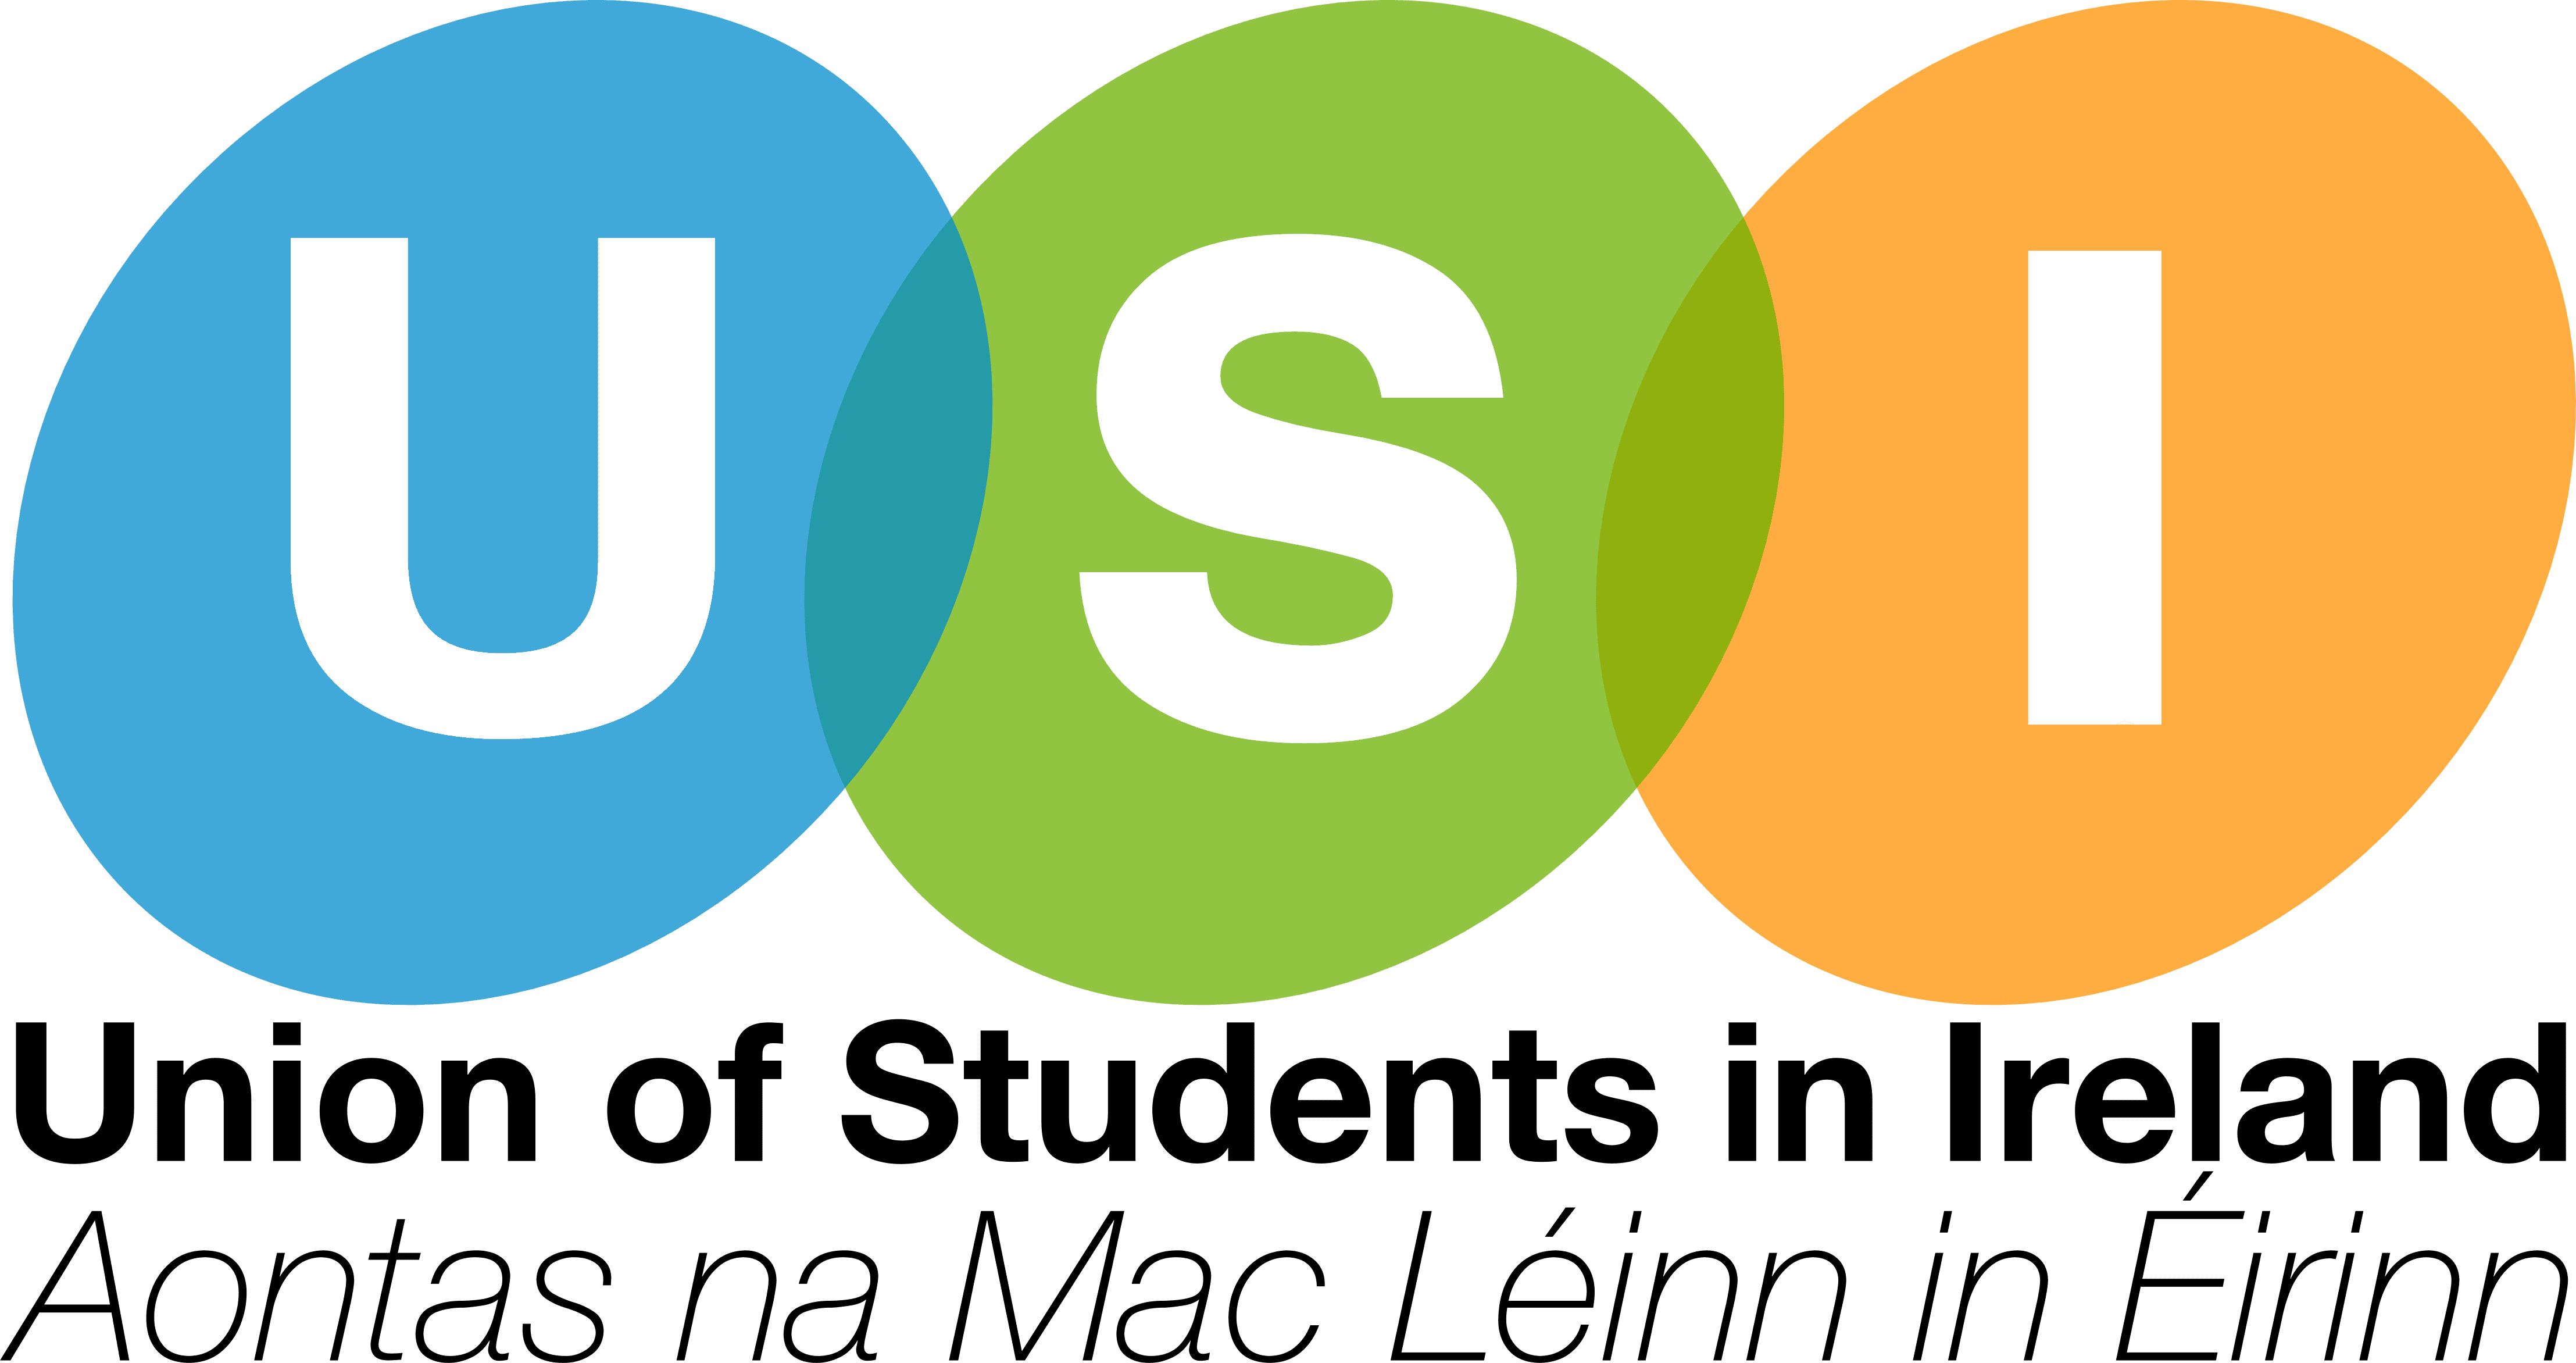 National Youth Council of Ireland, EQUATE, and INMO back USI’s National Demo in favour of Publicly-Funded 3rd Level Education